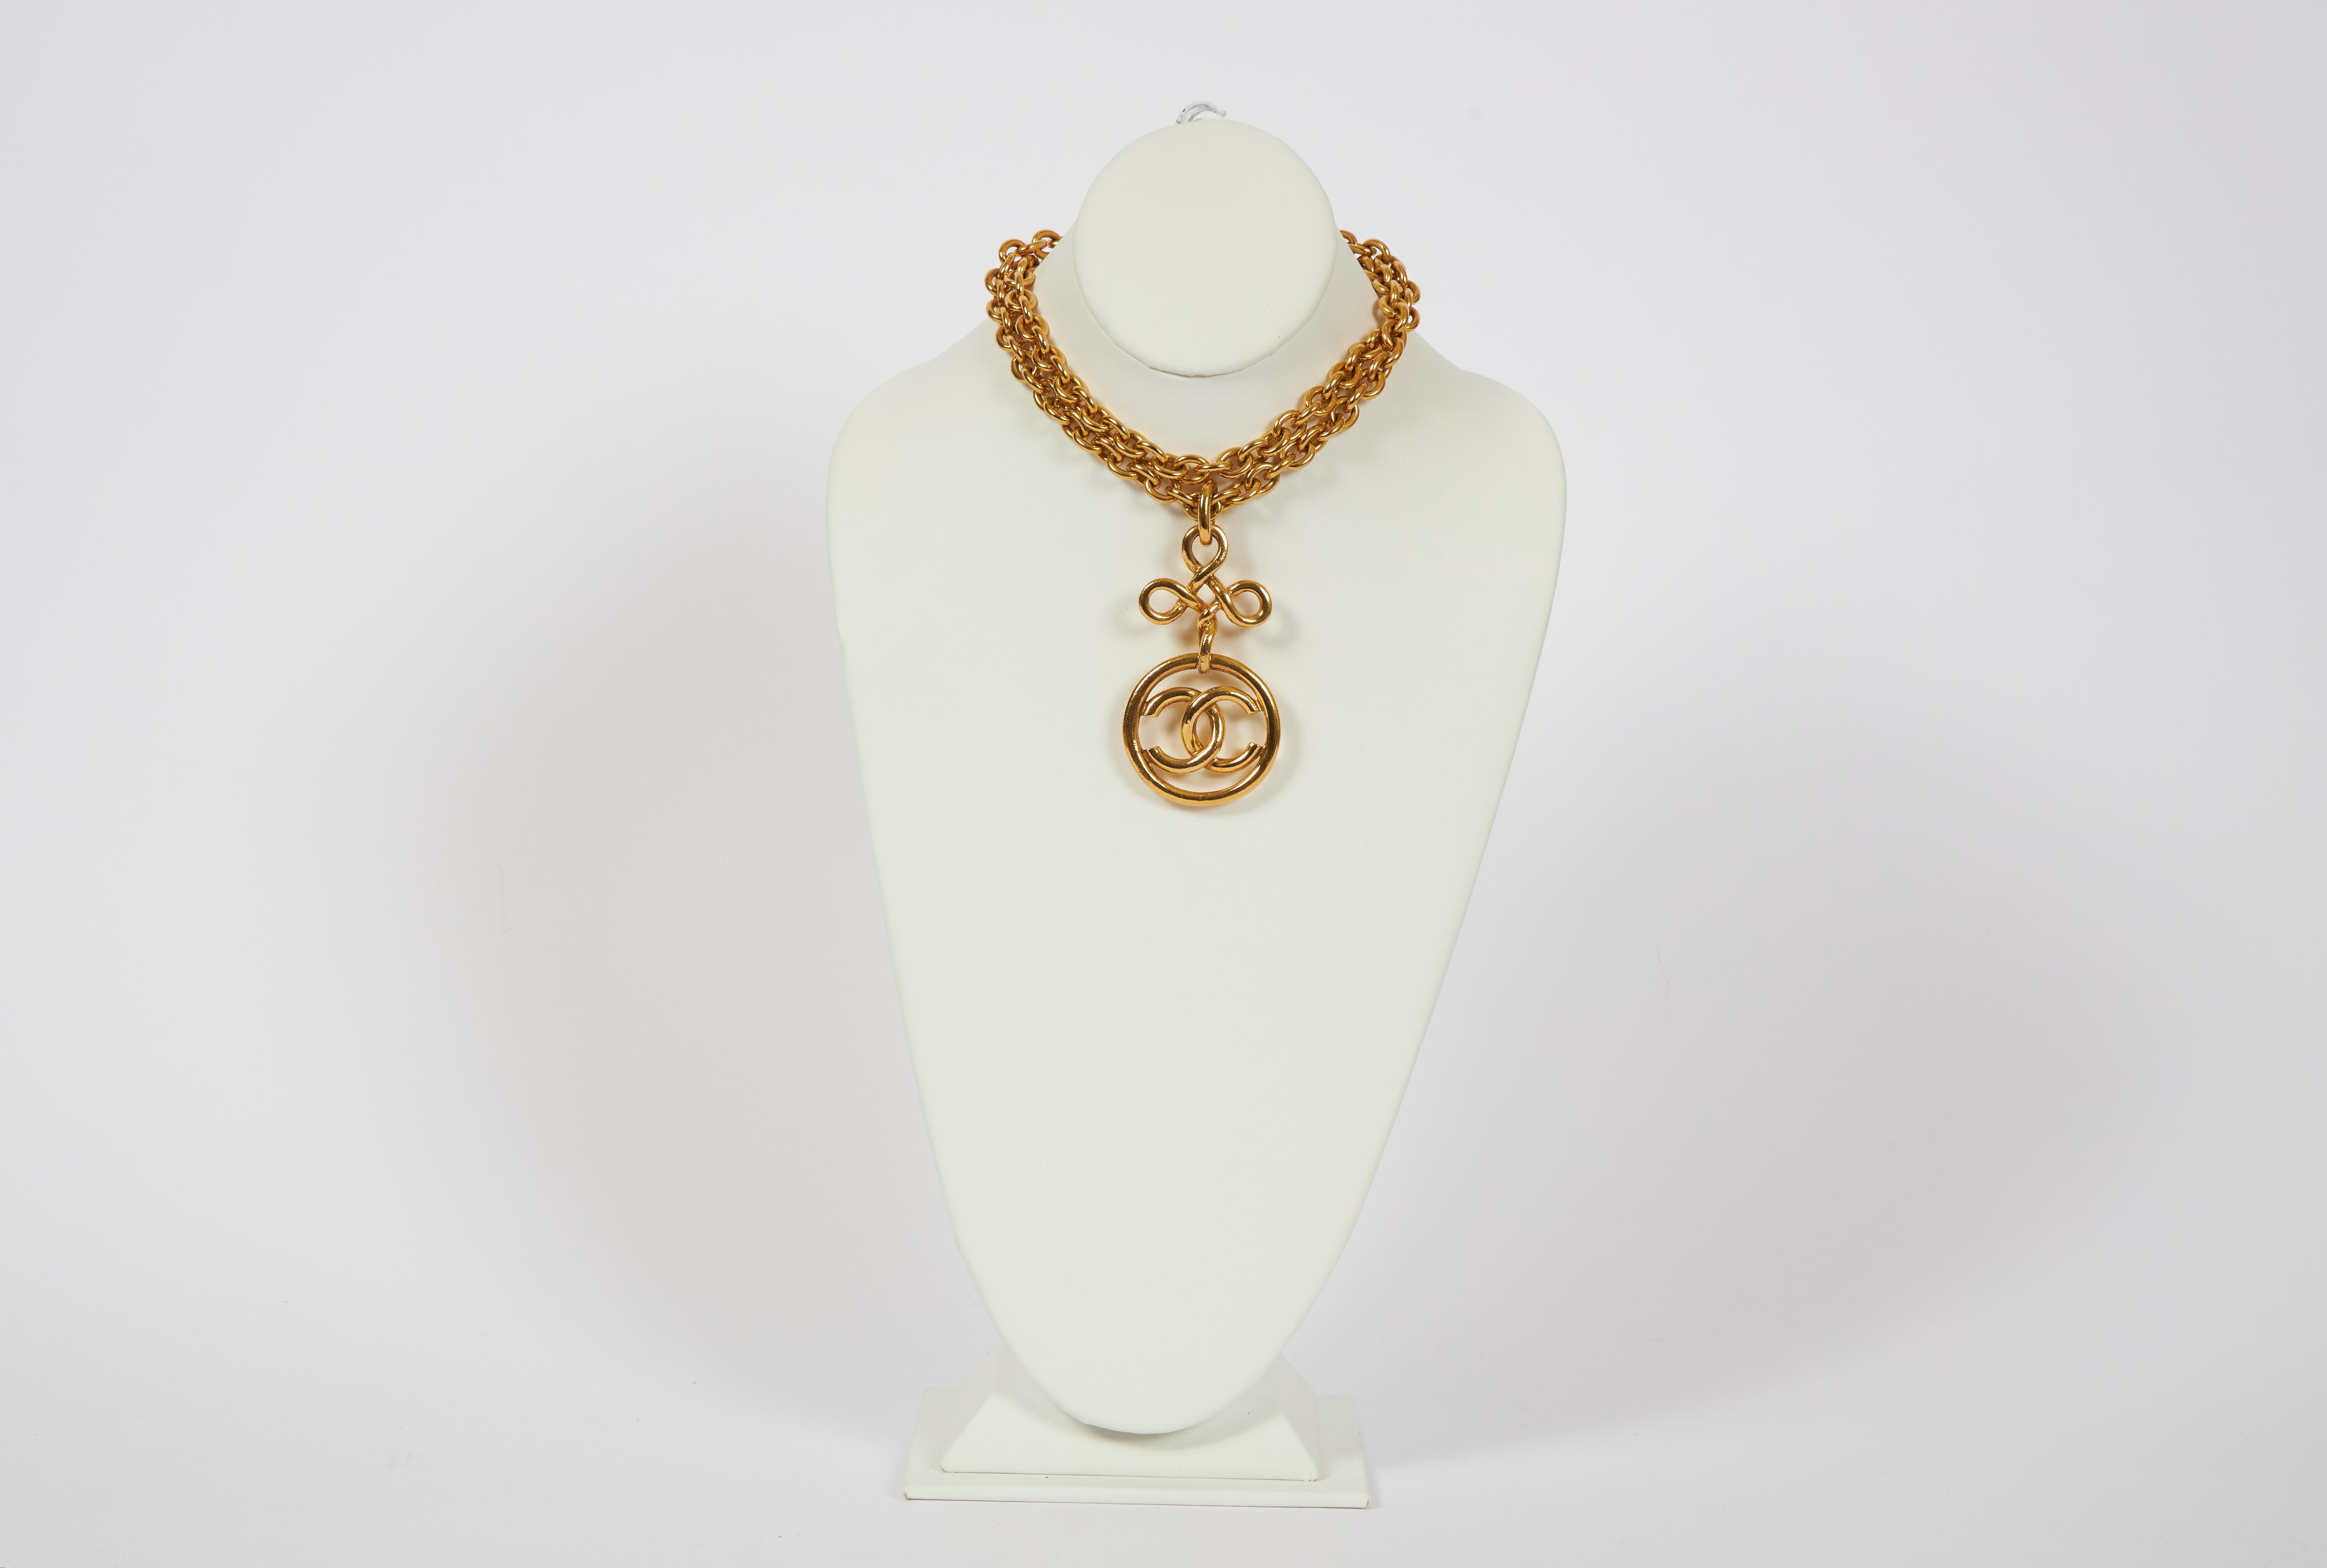 Chanel long goldtone metal chain necklace with a logo pendant. Spring 1993 collection. Pendant, 3.5